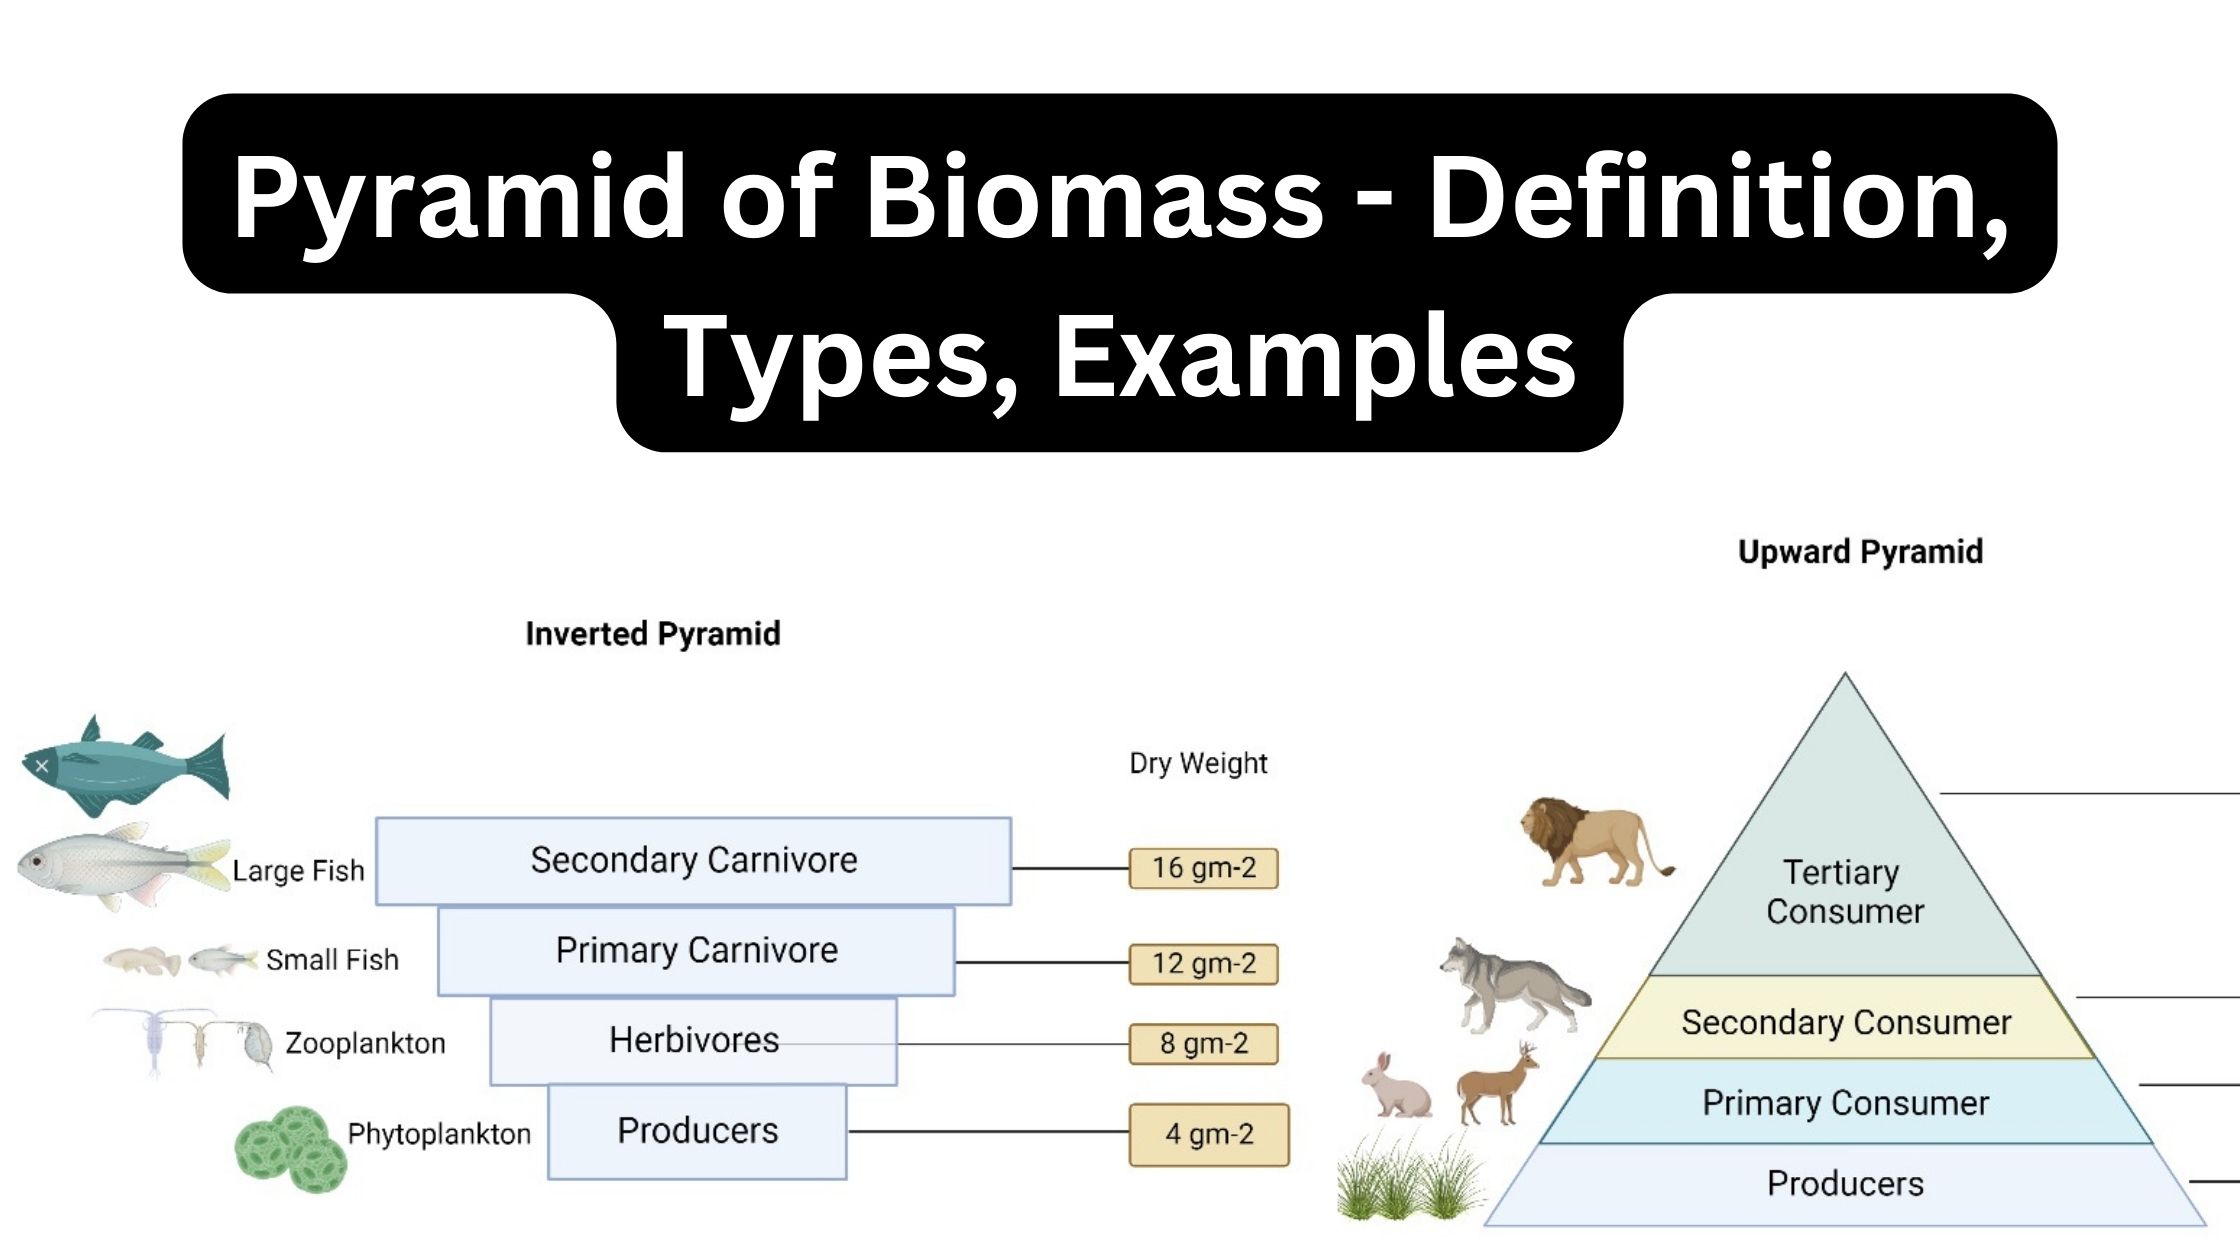 pyramid-of-biomass-definition-types-examples